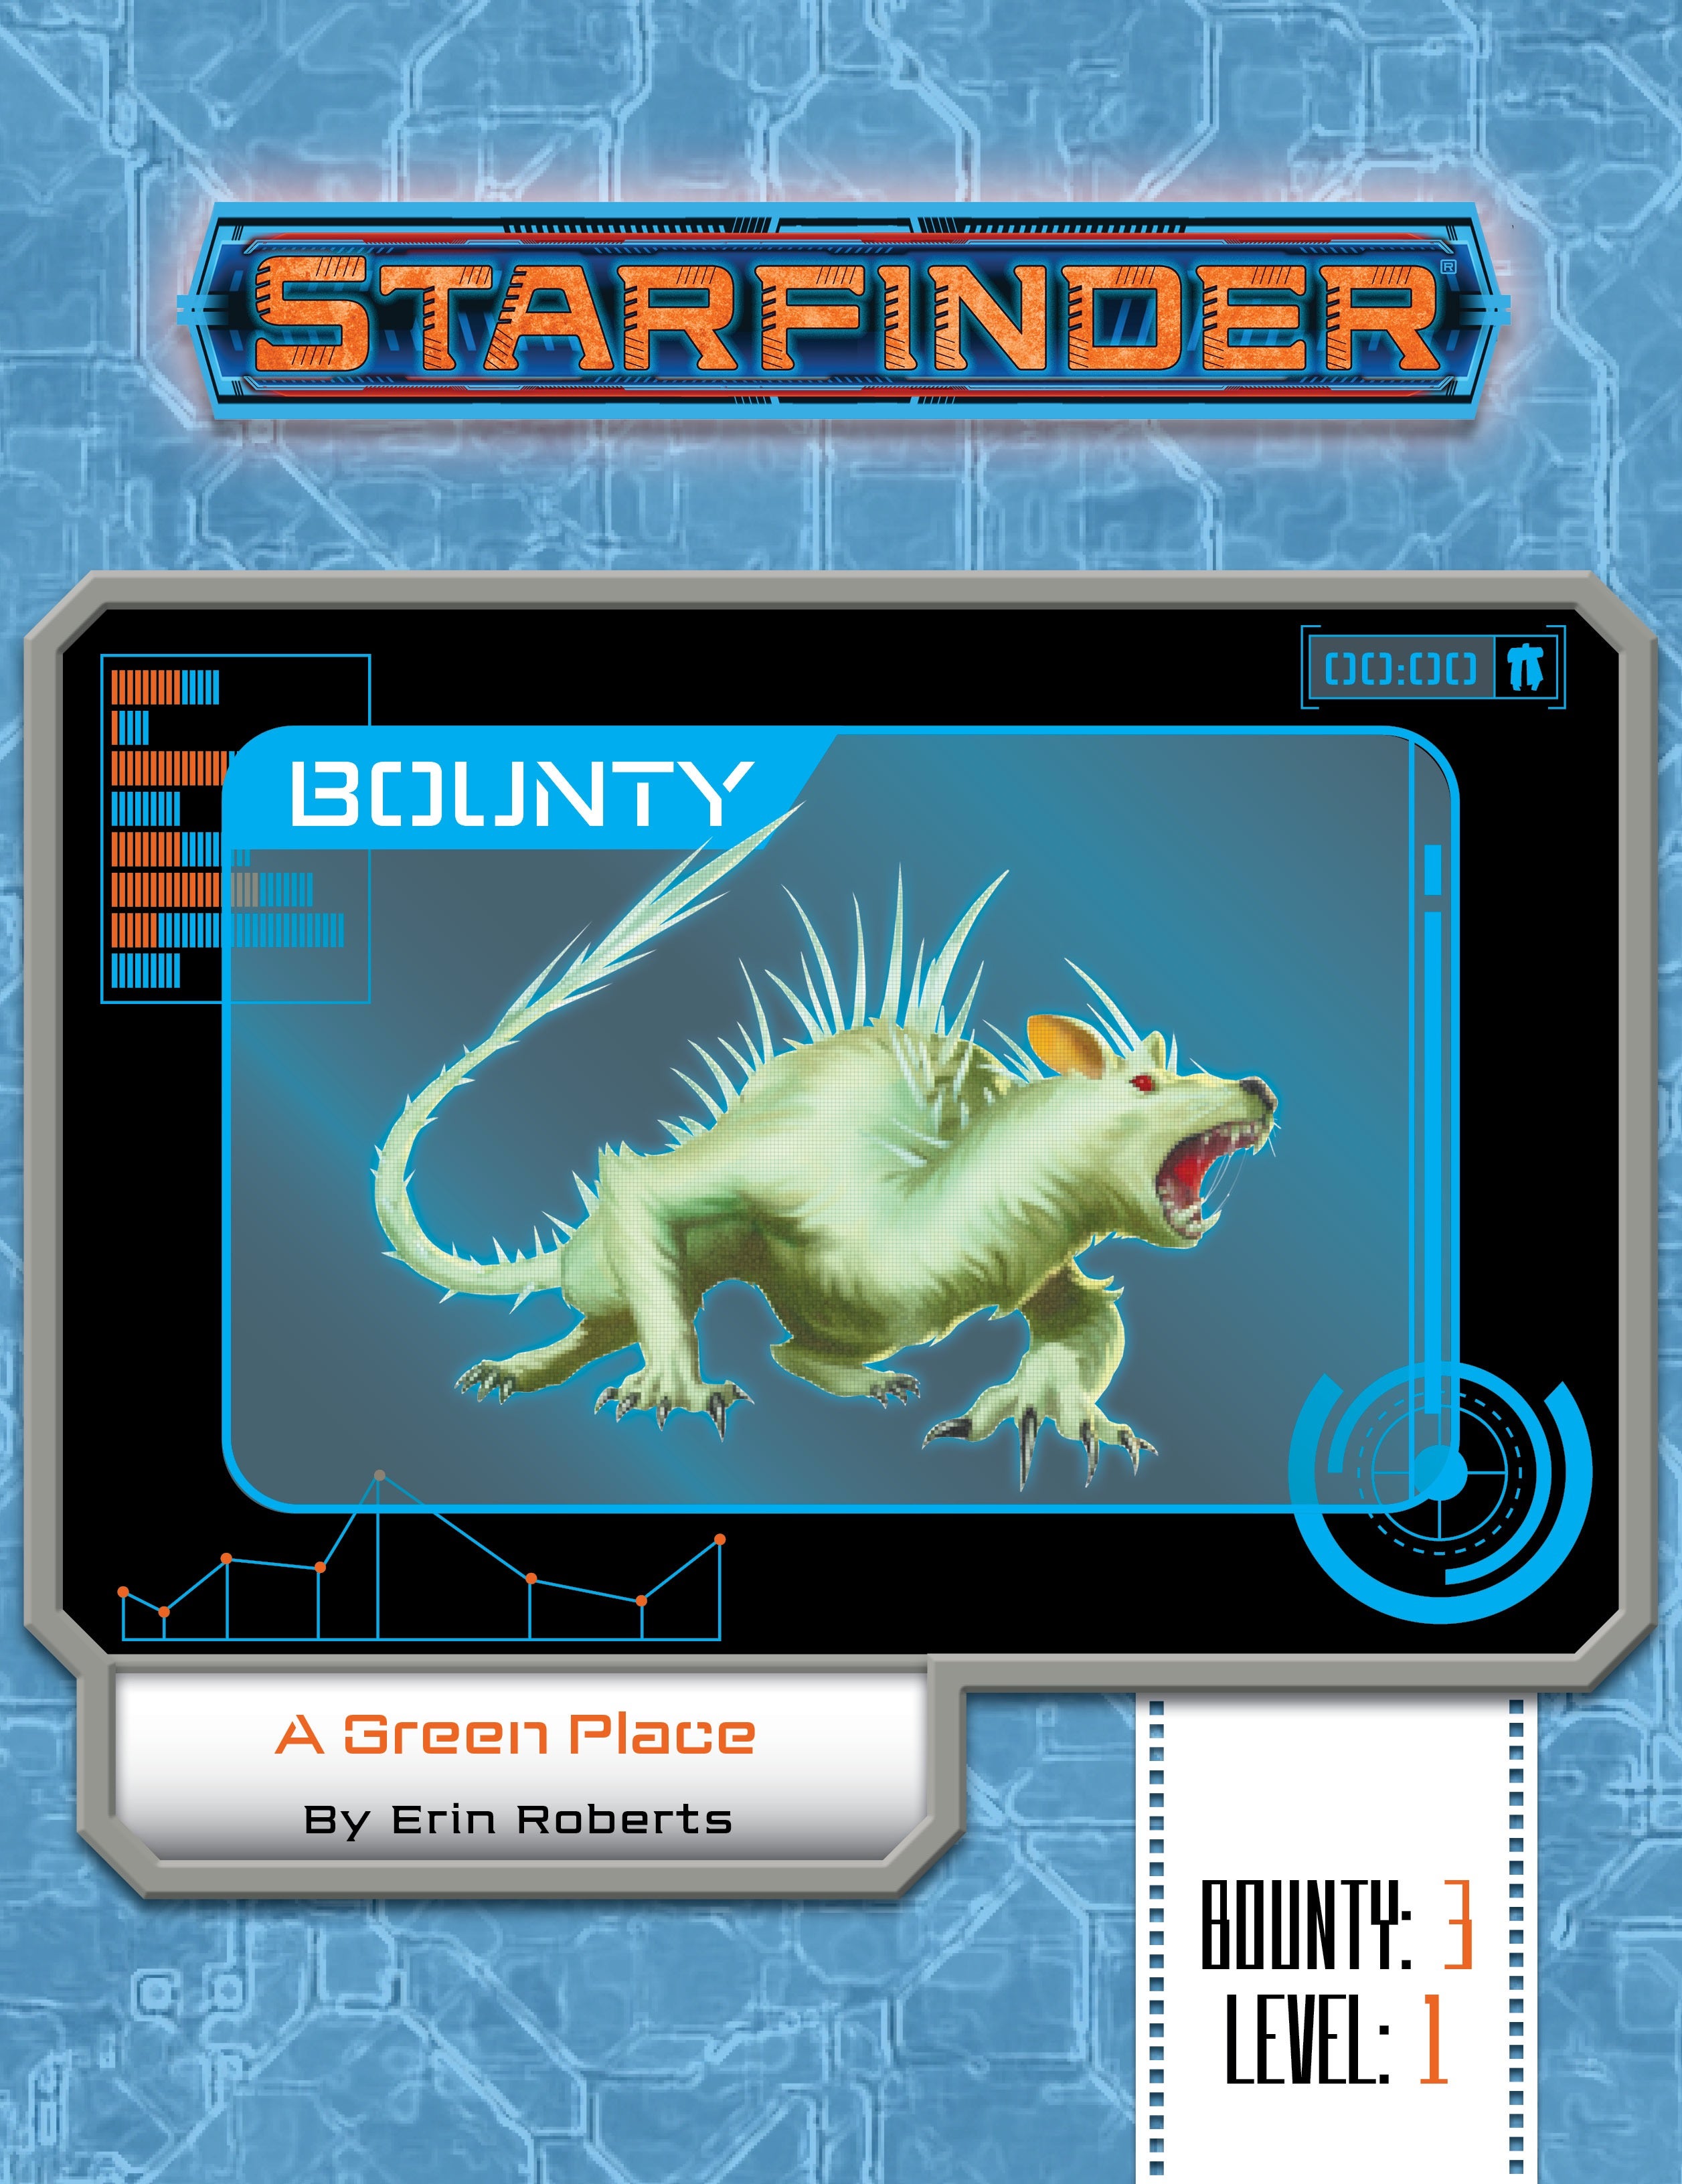 Starfinder Bounty: A Green Place by Erin Roberts